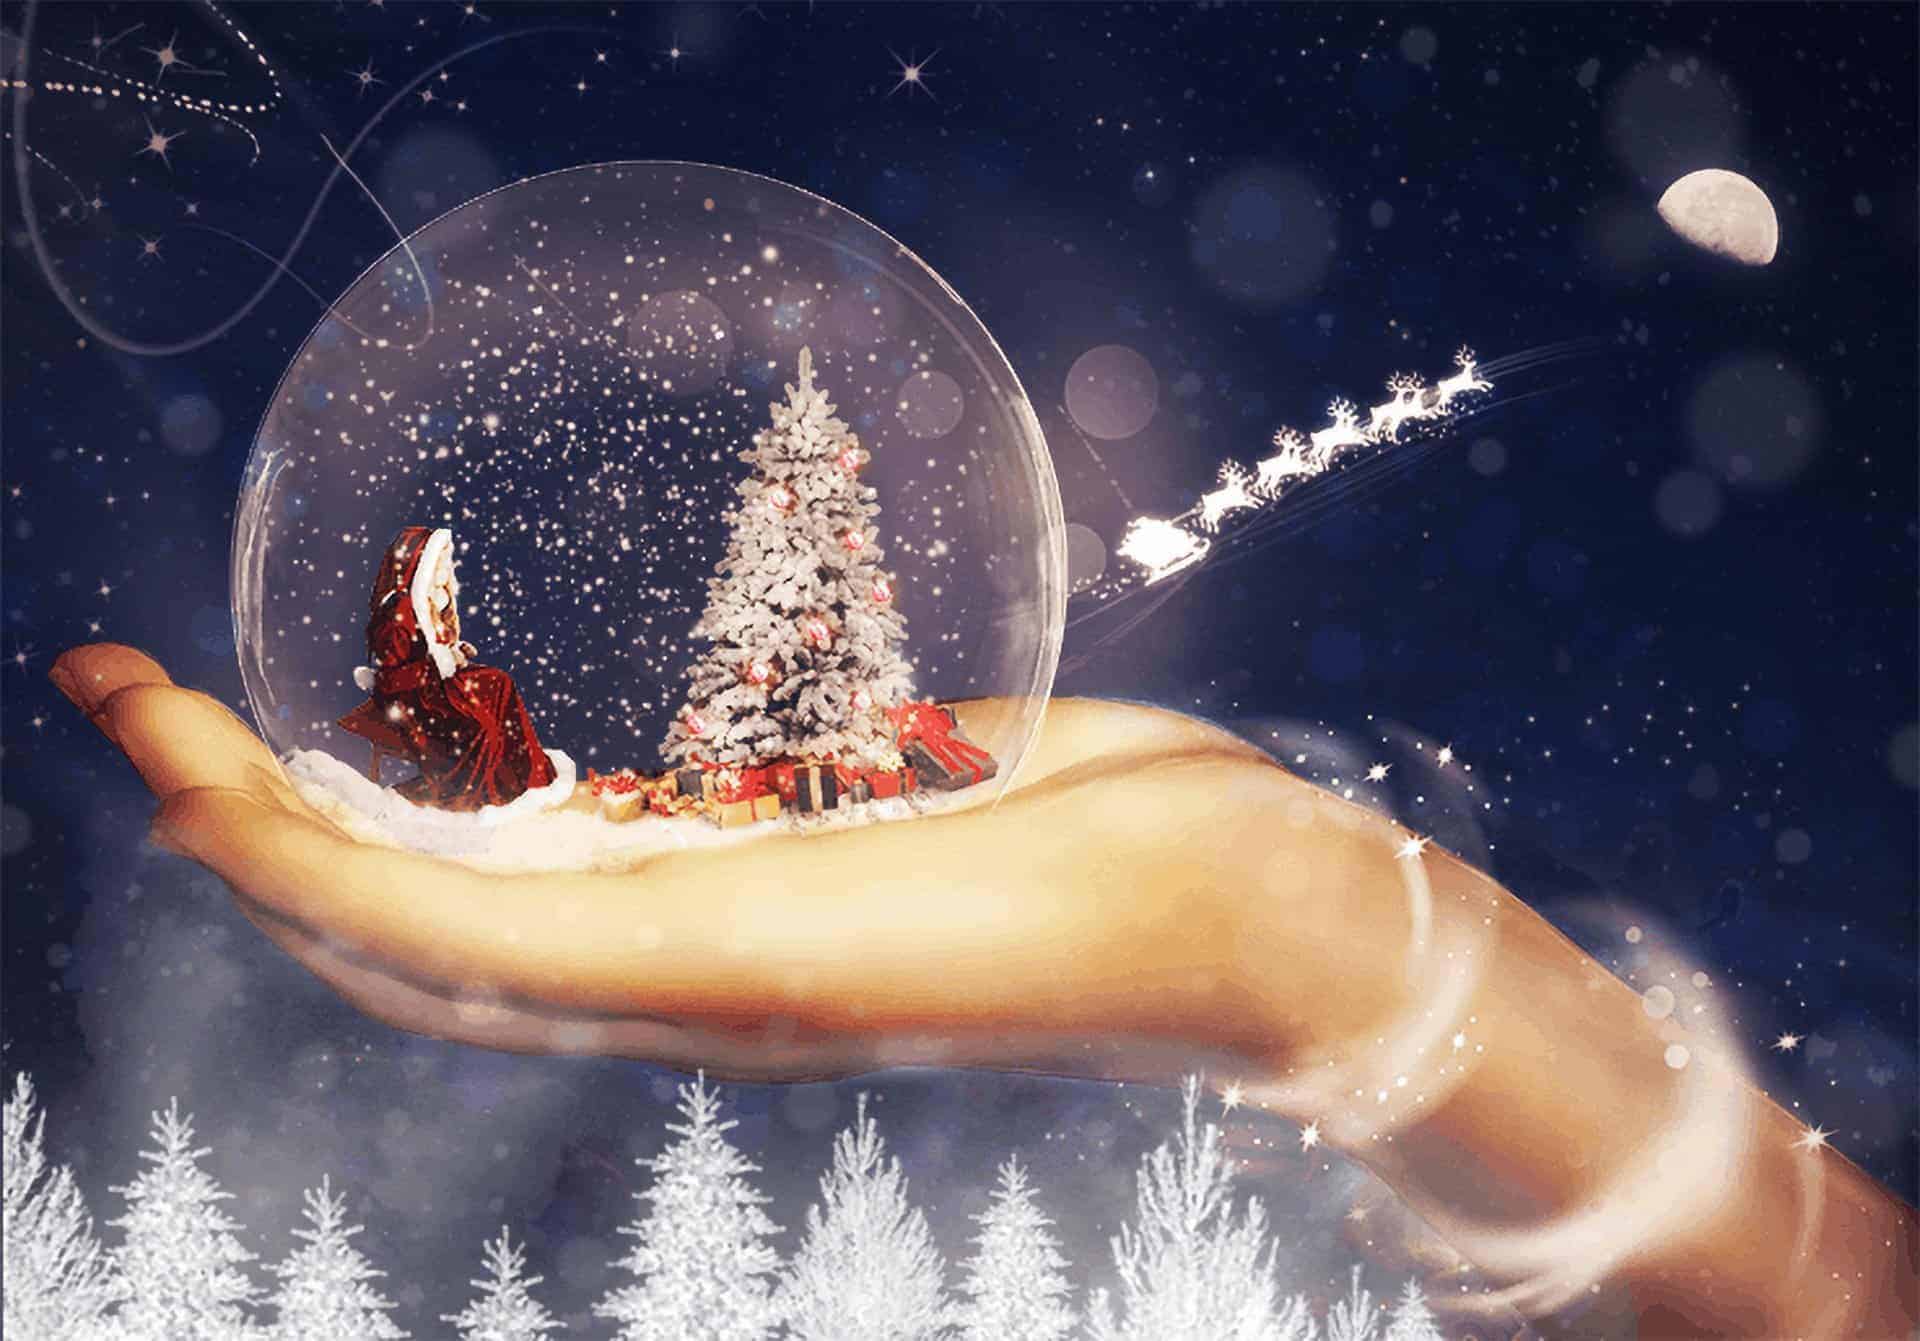 How to Create a Magical Christmas Snow Globe in Photoshop